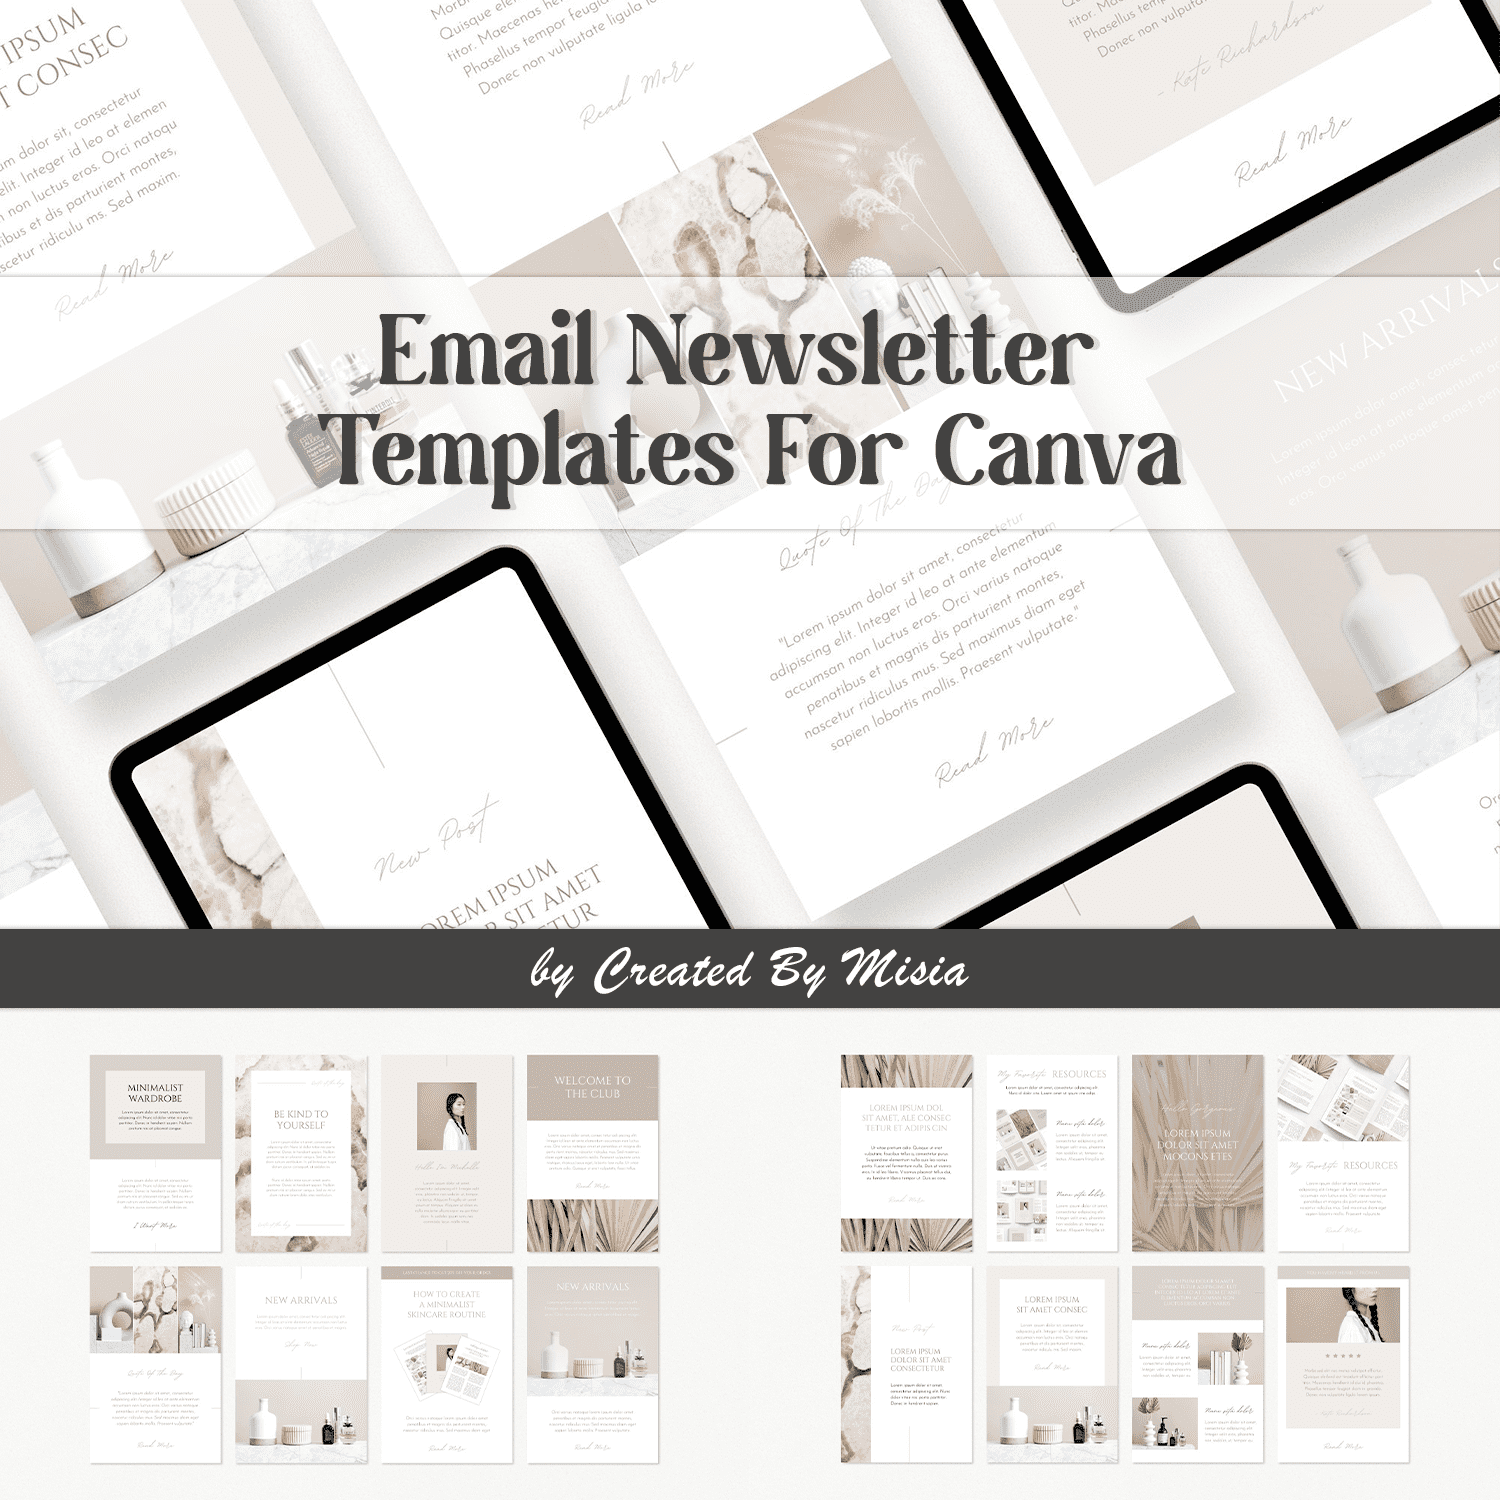 Set of images of adorable email newsletter design templates.